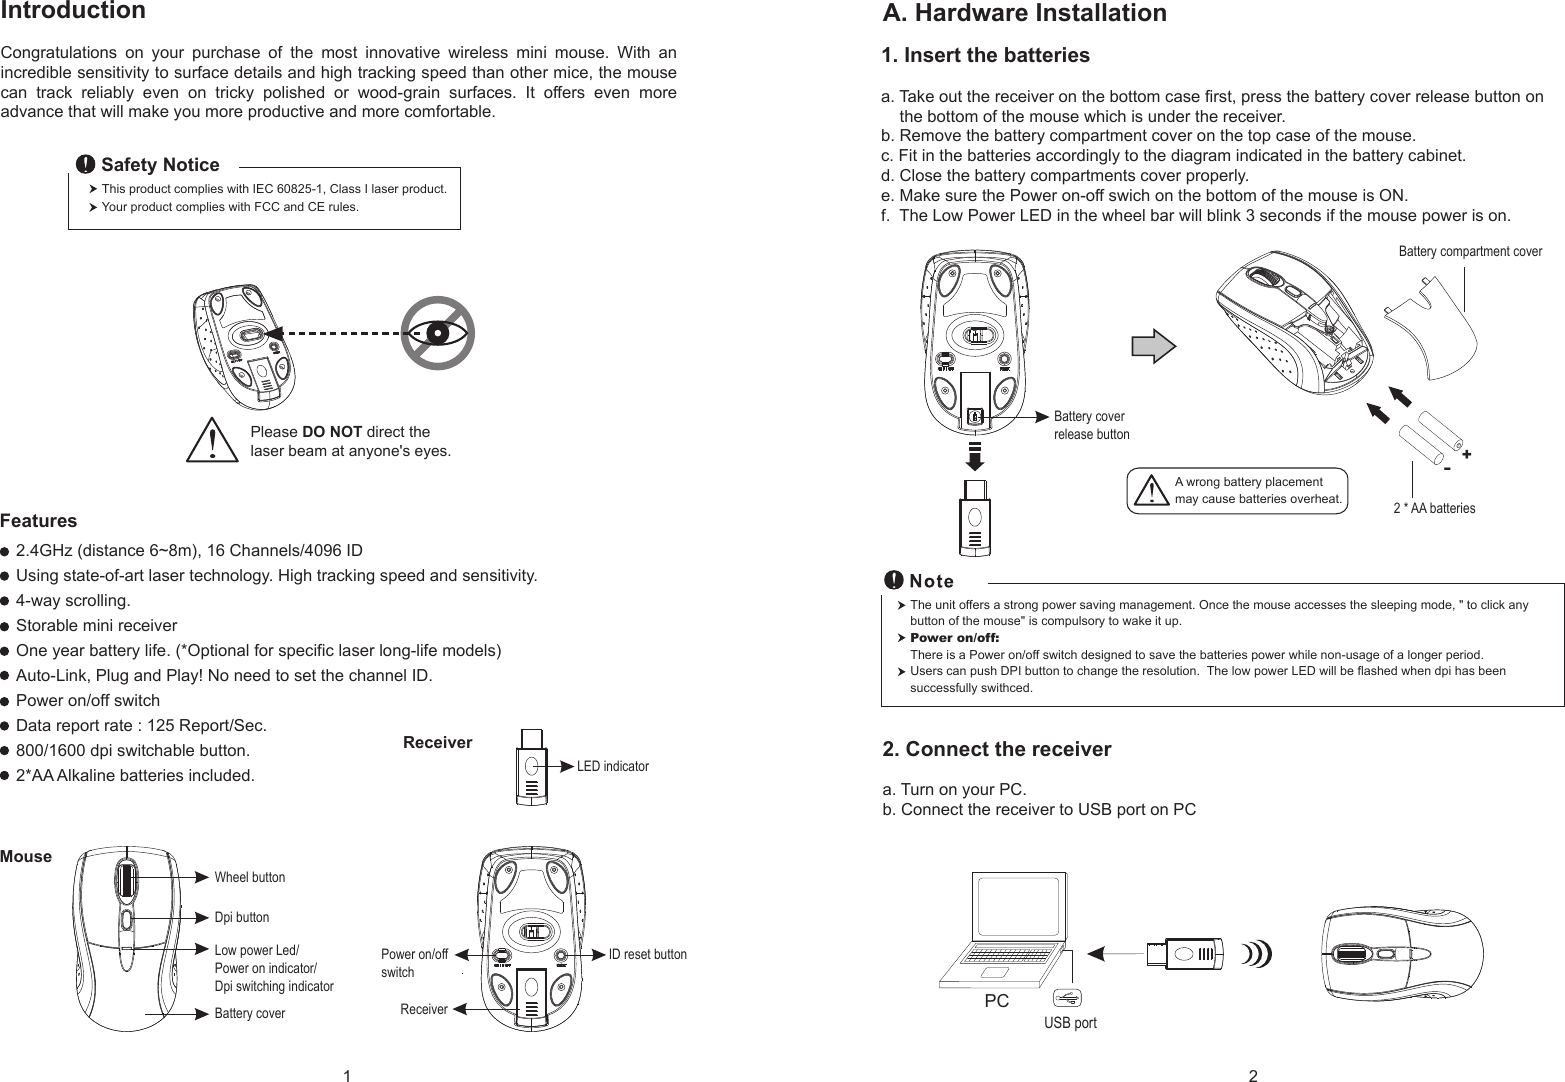 1. Insert the batteriesa. Take out the receiver on the bottom case first, press the battery cover release button on     the bottom of the mouse which is under the receiver.b. Remove the battery compartment cover on the top case of the mouse.c. Fit in the batteries accordingly to the diagram indicated in the battery cabinet.d. Close the battery compartments cover properly.e. Make sure the Power on-off swich on the bottom of the mouse is ON.f.  The Low Power LED in the wheel bar will blink 3 seconds if the mouse power is on.Wheel buttonDpi buttonBattery coverID reset buttonLED indicatorReceiverMouseReceiverIntroductionCongratulations  on  your  purchase  of  the  most  innovative  wireless  mini  mouse.  With  an incredible sensitivity to surface details and high tracking speed than other mice, the mouse can  track  reliably  even  on  tricky  polished  or  wood-grain  surfaces.  It  offers  even  more advance that will make you more productive and more comfortable.A. Hardware Installation2.4GHz (distance 6~8m), 16 Channels/4096 IDUsing state-of-art laser technology. High tracking speed and sensitivity.4-way scrolling.Storable mini receiverOne year battery life. (*Optional for specific laser long-life models)Auto-Link, Plug and Play! No need to set the channel ID.Power on/off switchData report rate : 125 Report/Sec. 800/1600 dpi switchable button.2*AA Alkaline batteries included. Power on/offswitchThis product complies with IEC 60825-1, Class I laser product.  Your product complies with FCC and CE rules.Safety NoticePlease DO NOT direct the laser beam at anyone&apos;s eyes.Features+-A wrong battery placementmay cause batteries overheat.Battery compartment cover2 * AA batteriesBattery cover release buttonLow power Led/Power on indicator/Dpi switching indicator2. Connect the receivera. Turn on your PC.b. Connect the receiver to USB port on PCPCUSB portThe unit offers a strong power saving management. Once the mouse accesses the sleeping mode, &quot; to click any button of the mouse&quot; is compulsory to wake it up.Power on/off: There is a Power on/off switch designed to save the batteries power while non-usage of a longer period.Users can push DPI button to change the resolution.  The low power LED will be flashed when dpi has been successfully swithced.1 2